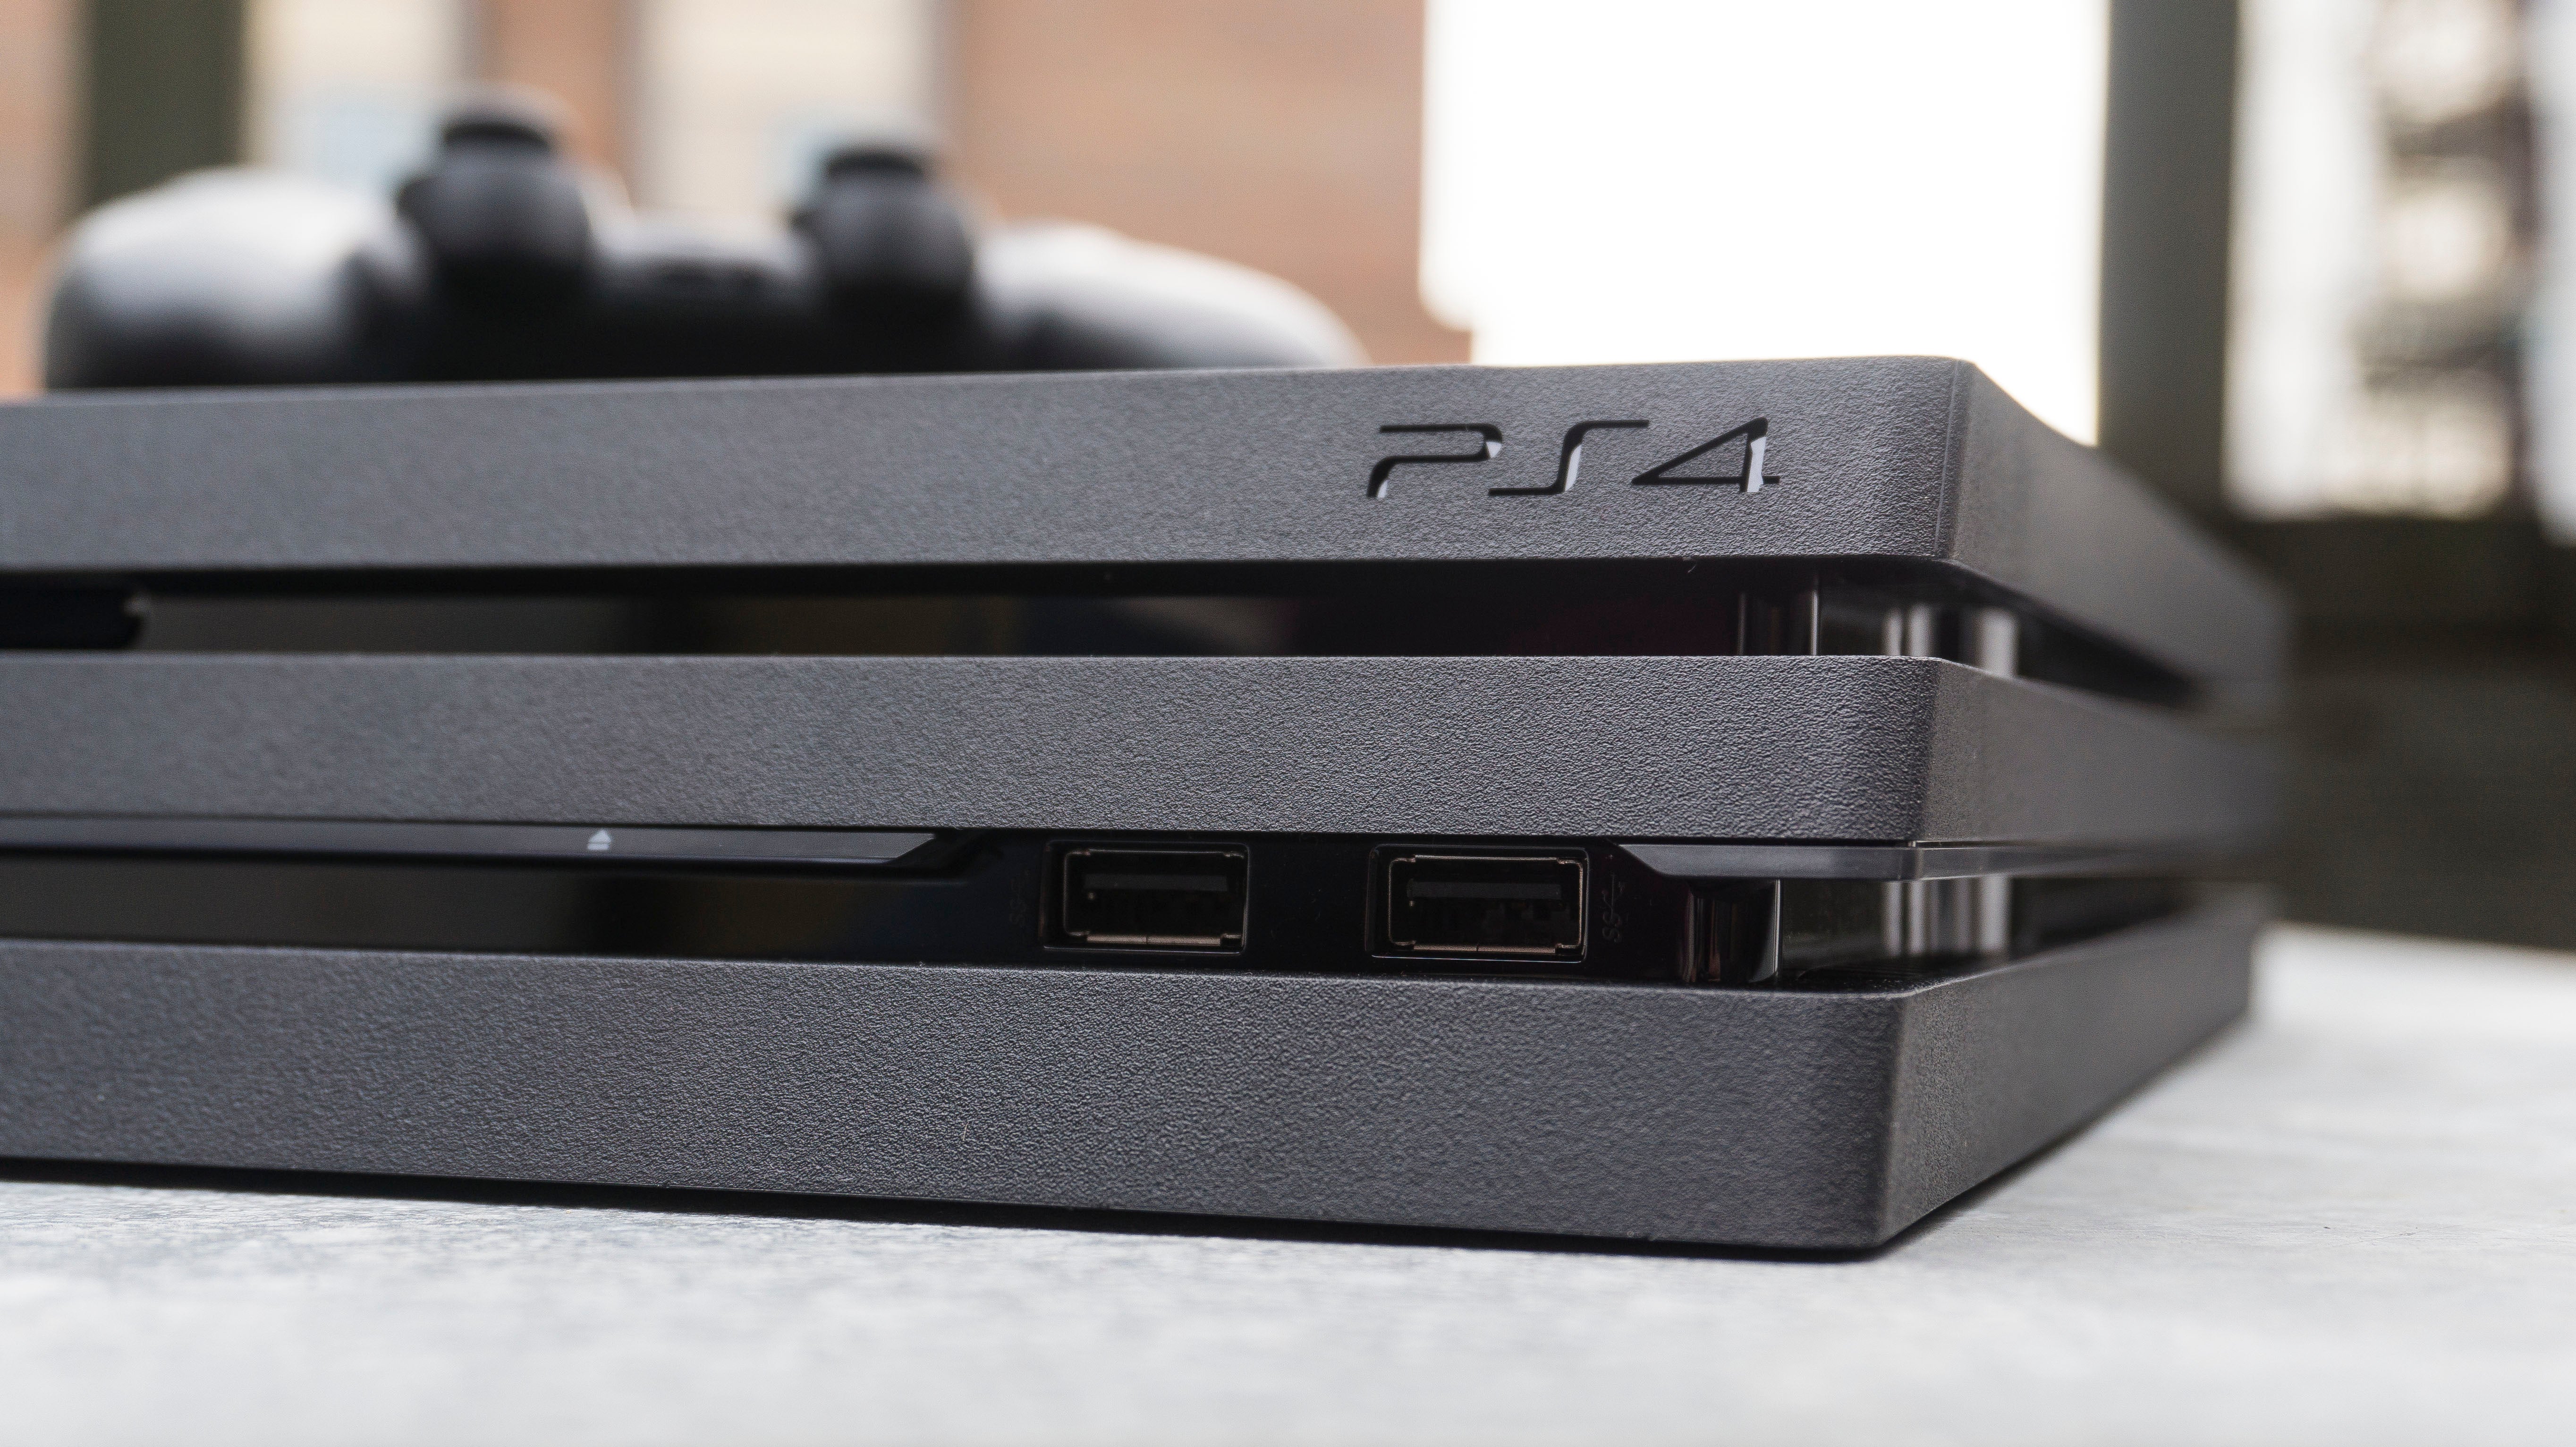 PS4 Pro vs PS4: What's the difference? | Expert Reviews